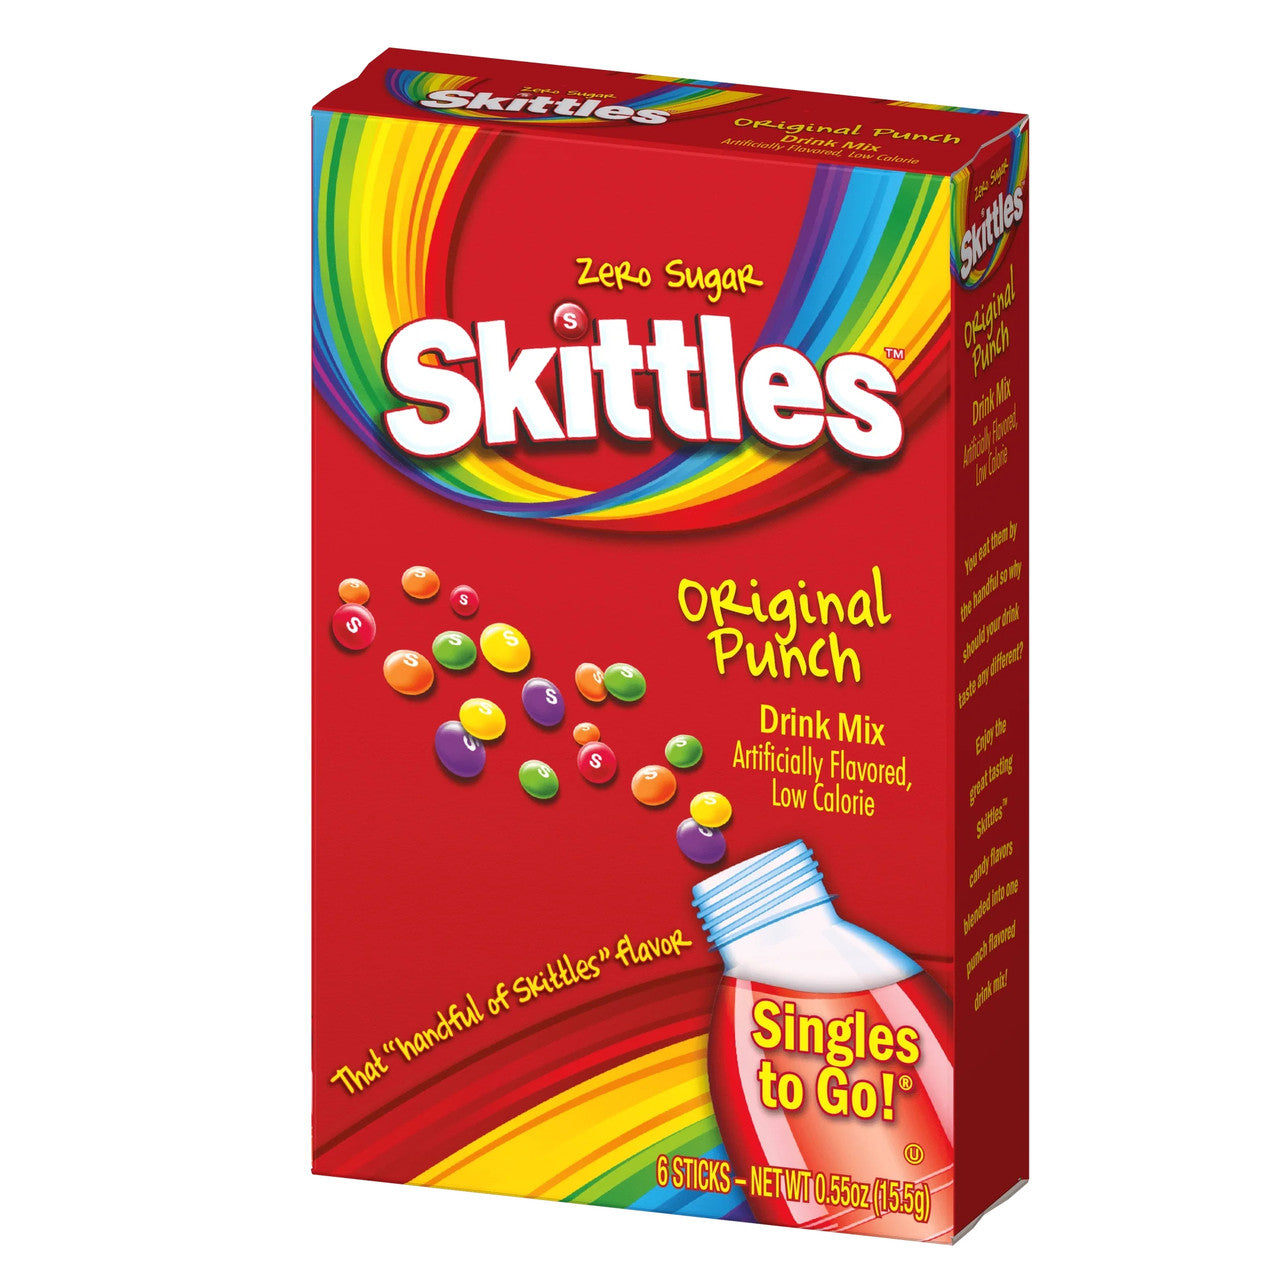 Skittles Zero Sugar Original Punch Flavored Drink Mix, 6 packets, 15.5g/0.55 oz. Box {Imported from Canada}